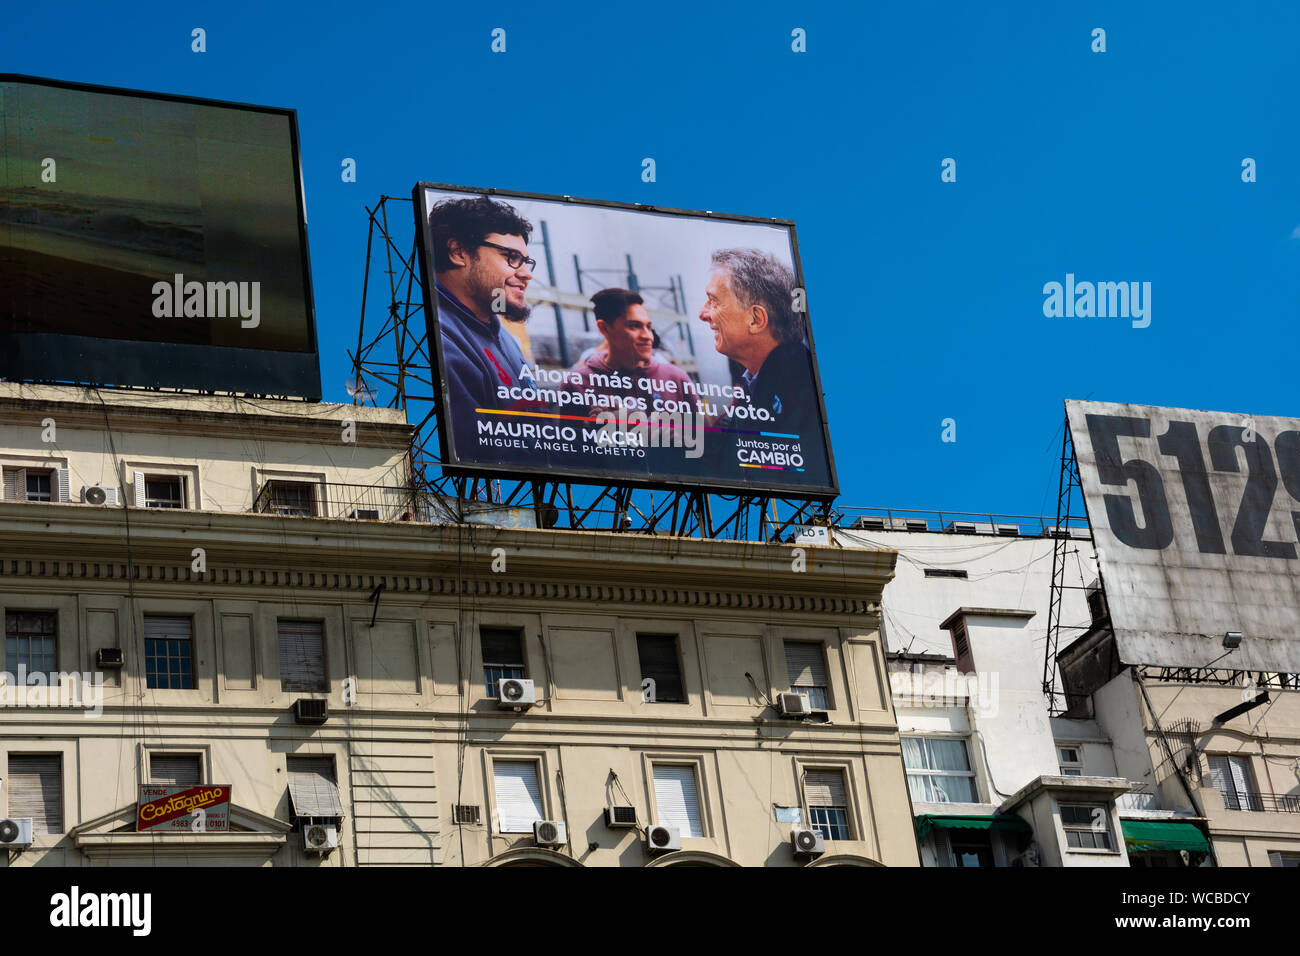 Buenos Aires, Argentina. August 19, 2019. Political party sign from 2019 presidencial elections in Argentina. (Together for the Change - Let's Change Stock Photo